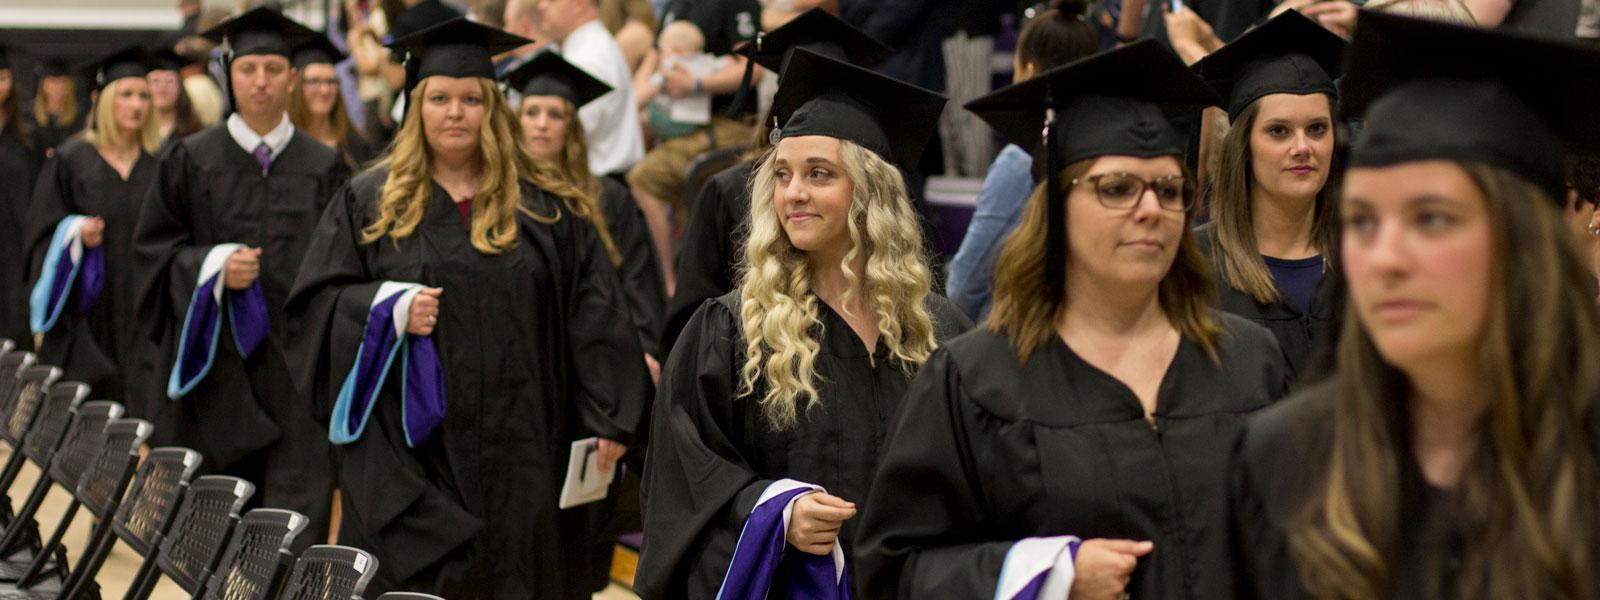 graduates walk in commencement processional holding master's hoods